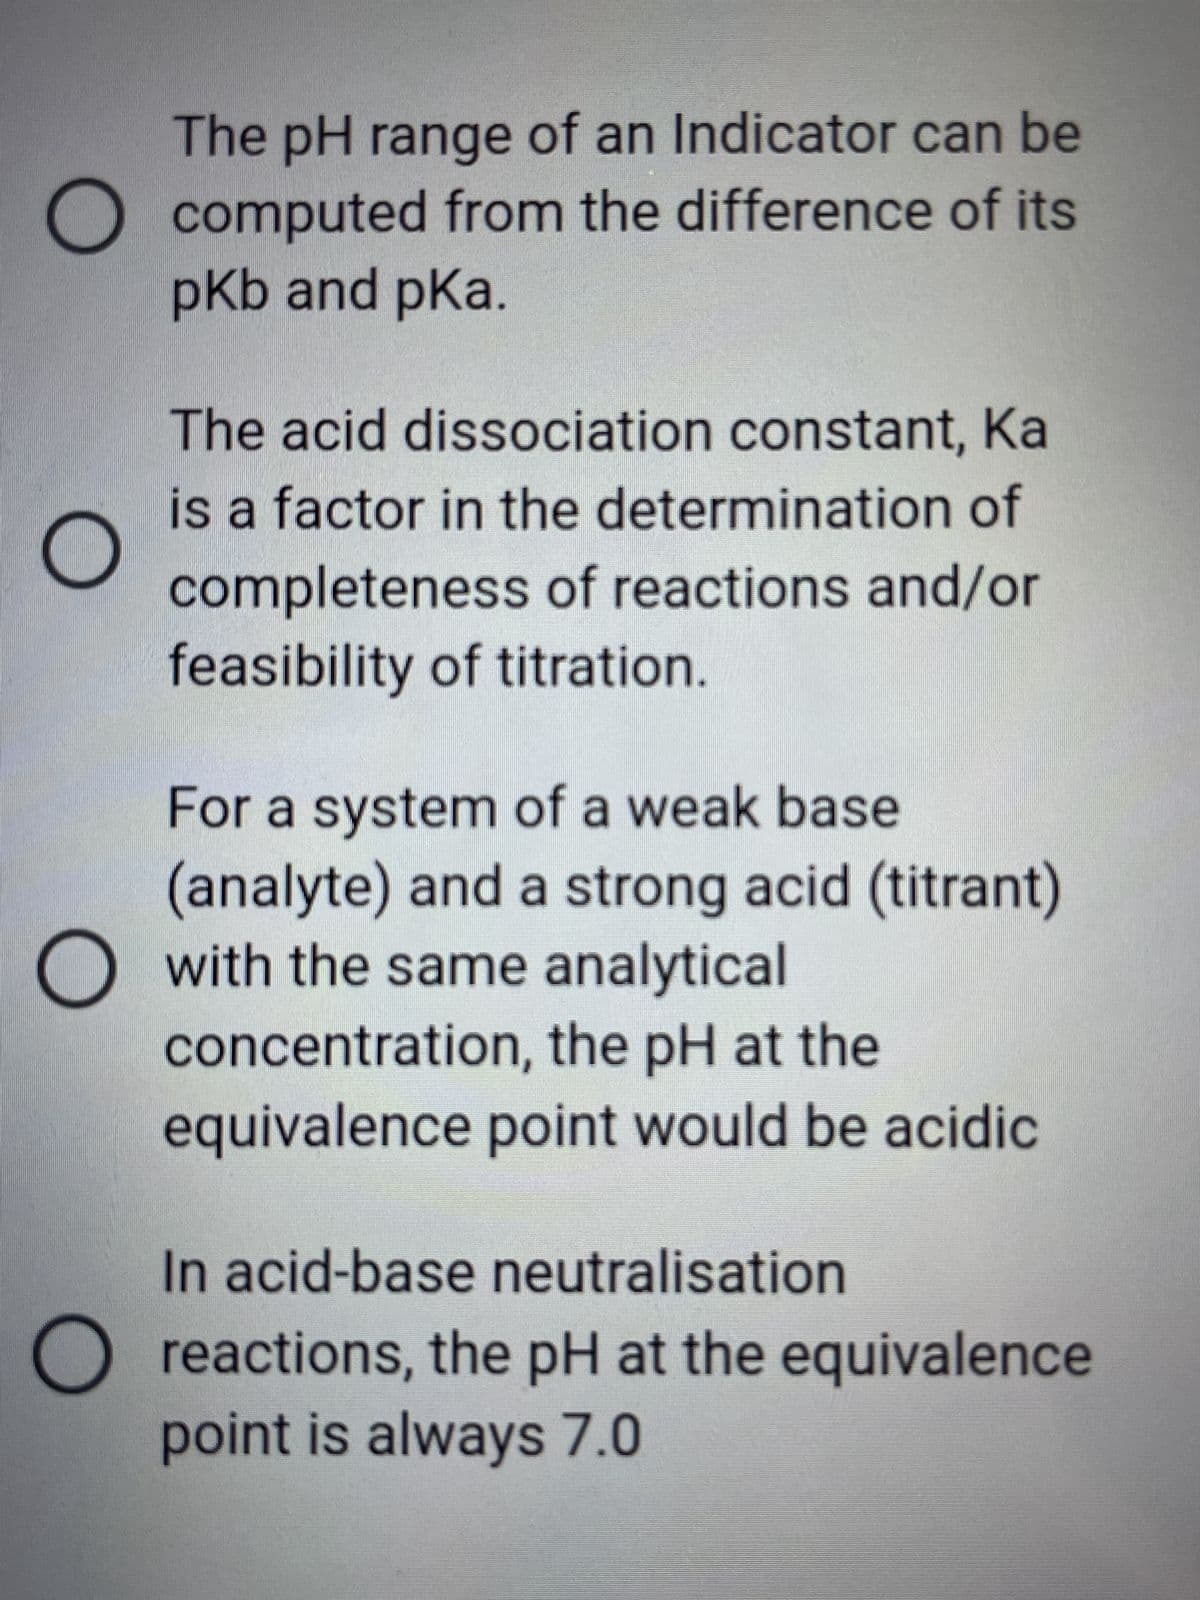 O
The pH range of an Indicator can be
computed from the difference of its
pKb and pka.
O
The acid dissociation constant, Ka
is a factor in the determination of
completeness of reactions and/or
feasibility of titration.
For a system of a weak base
(analyte) and a strong acid (titrant)
O with the same analytical
concentration, the pH at the
equivalence point would be acidic
In acid-base neutralisation
reactions, the pH at the equivalence
point is always 7.0